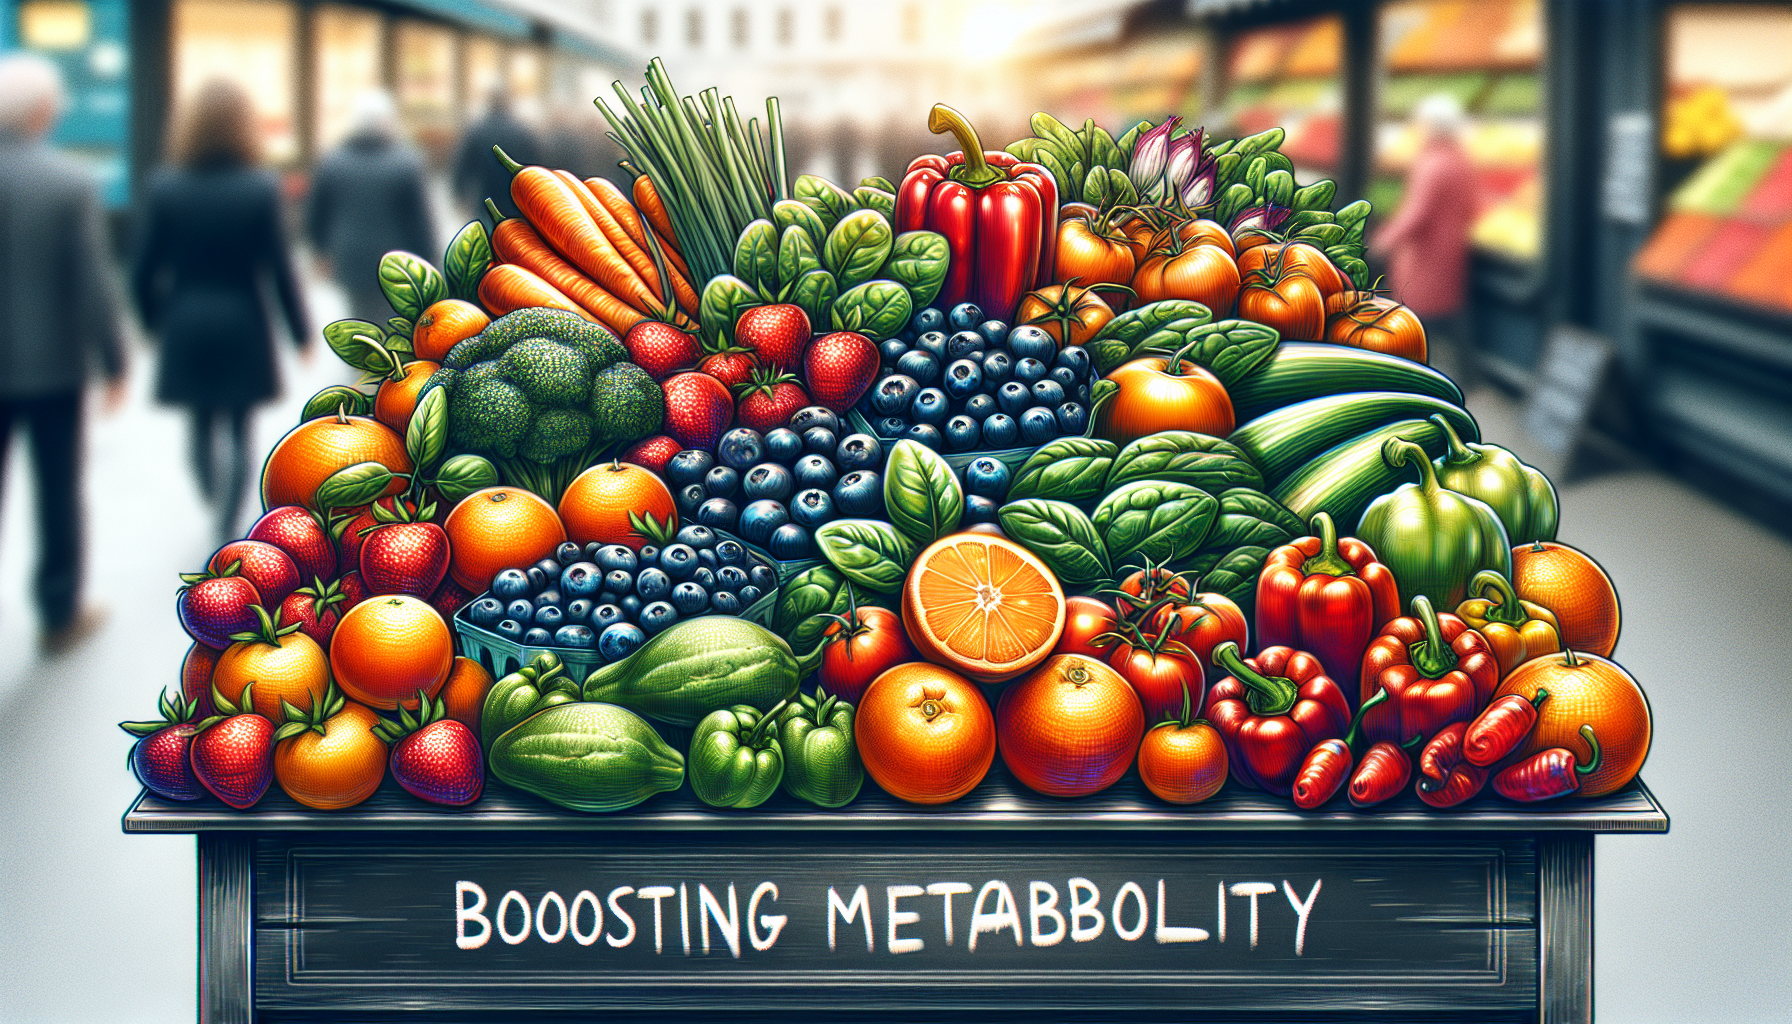 What Foods Speed Up Metabolism?